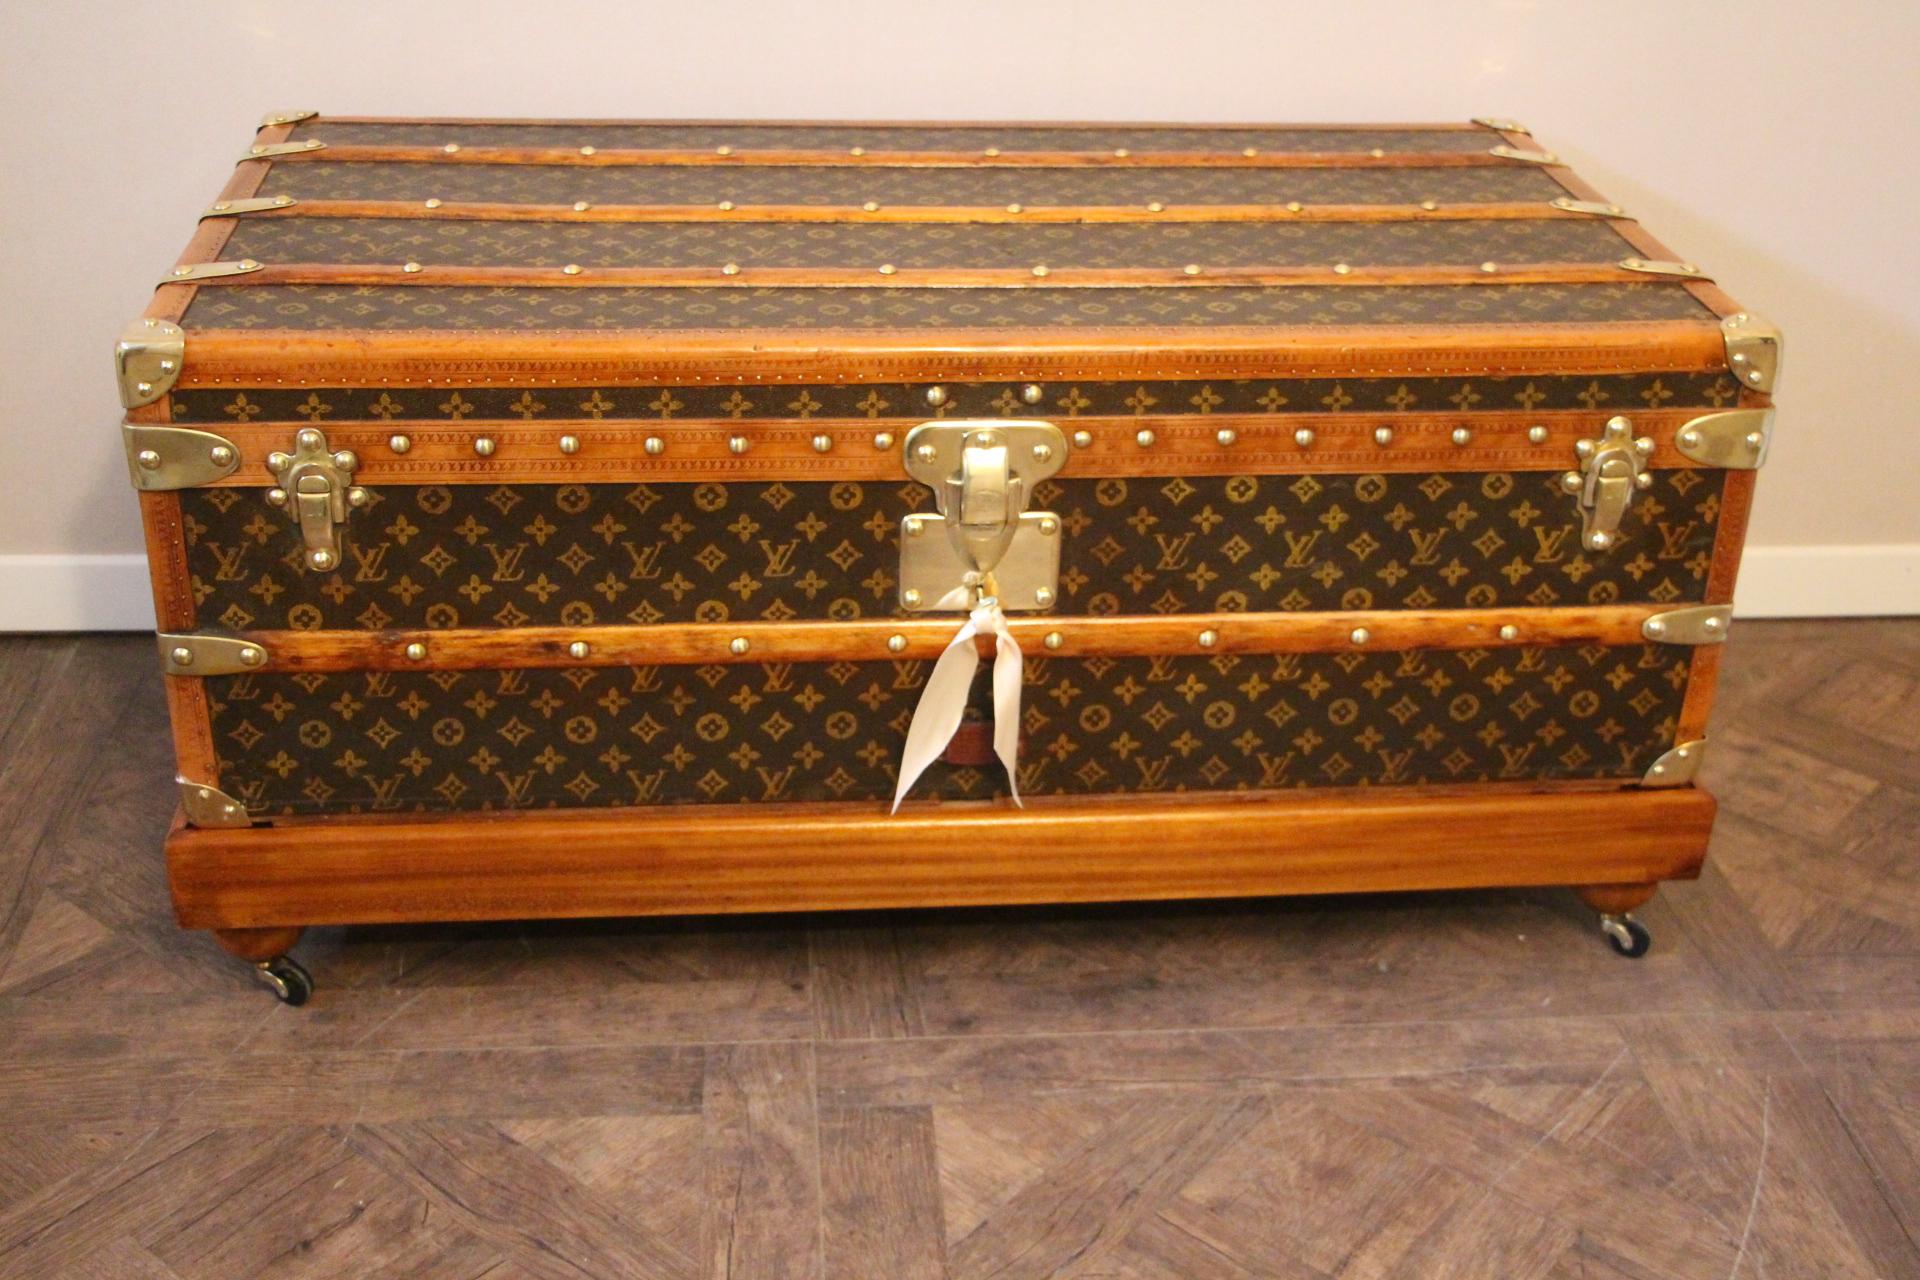 Very nice Louis Vuitton hand stenciled monogram canvas featuring honey color lozine trim and LV stamped solid brass locks and clasps, LV stamped studs as well as large leather side handles.
No painted stripes, no initials.
Interior is all original